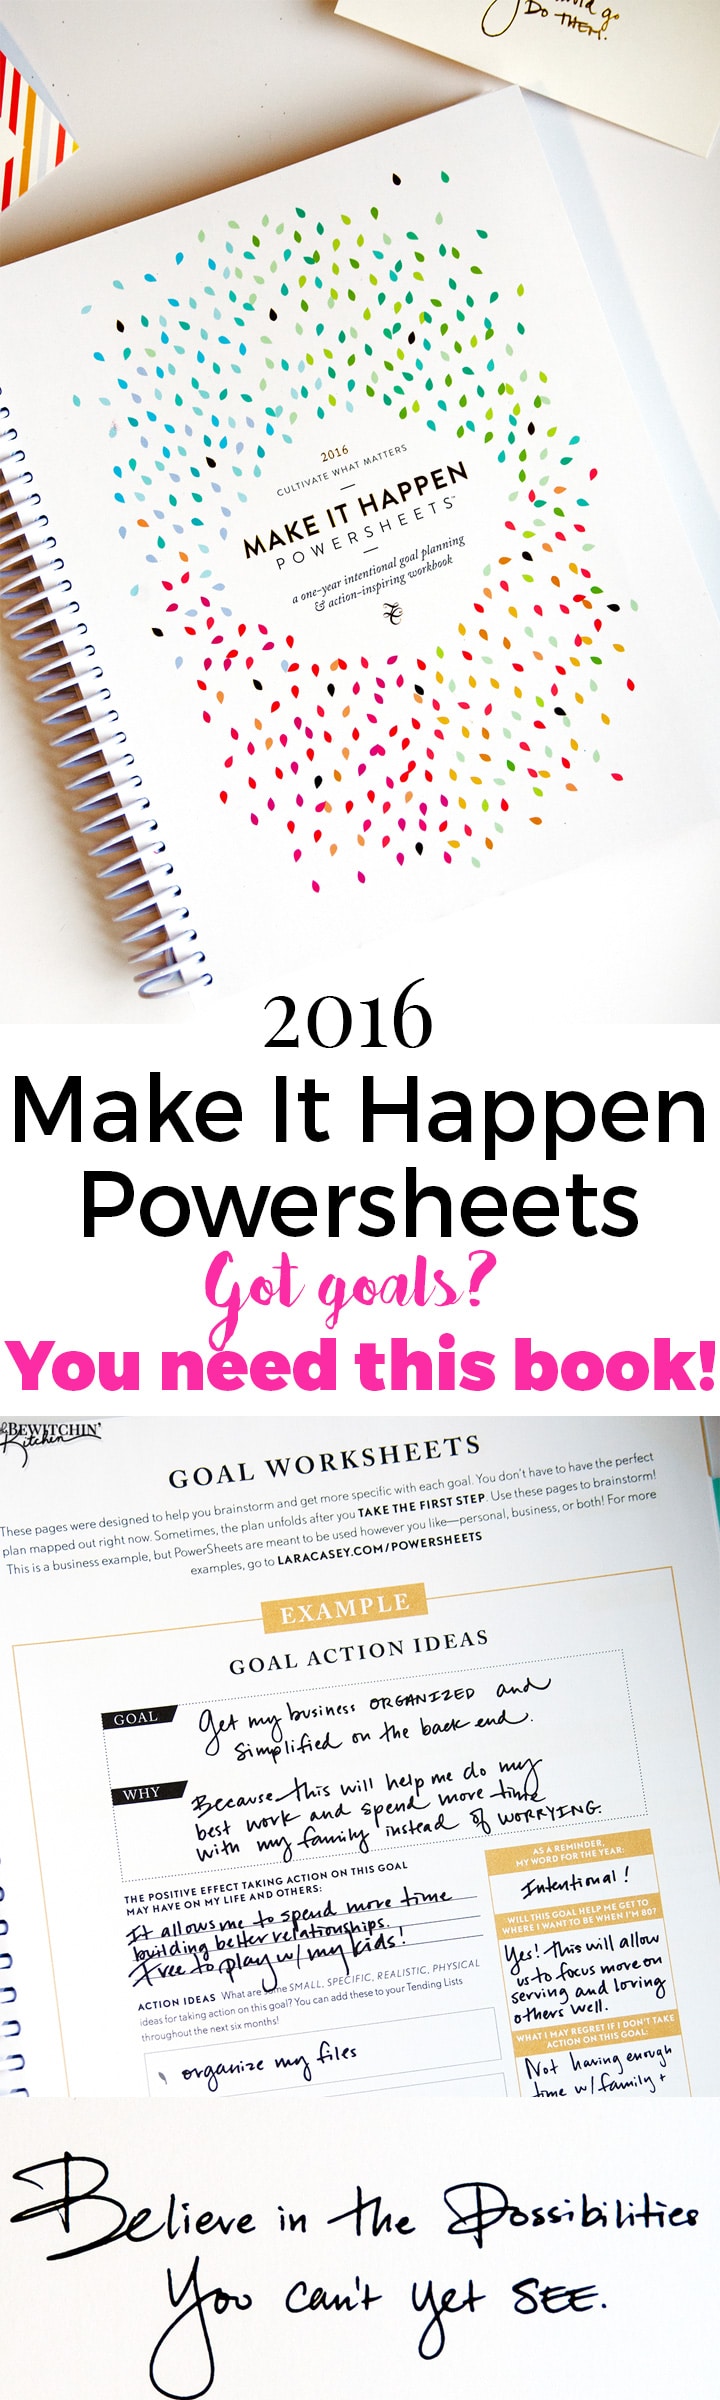 The 2016 Make It Happen Powersheets from the Lara Casey Shop! Here's a sneak peak at my order, I'm so excited to get started. Setting goals and crushing them to be the best girl boss out there! | thebewitchinkitchen.com